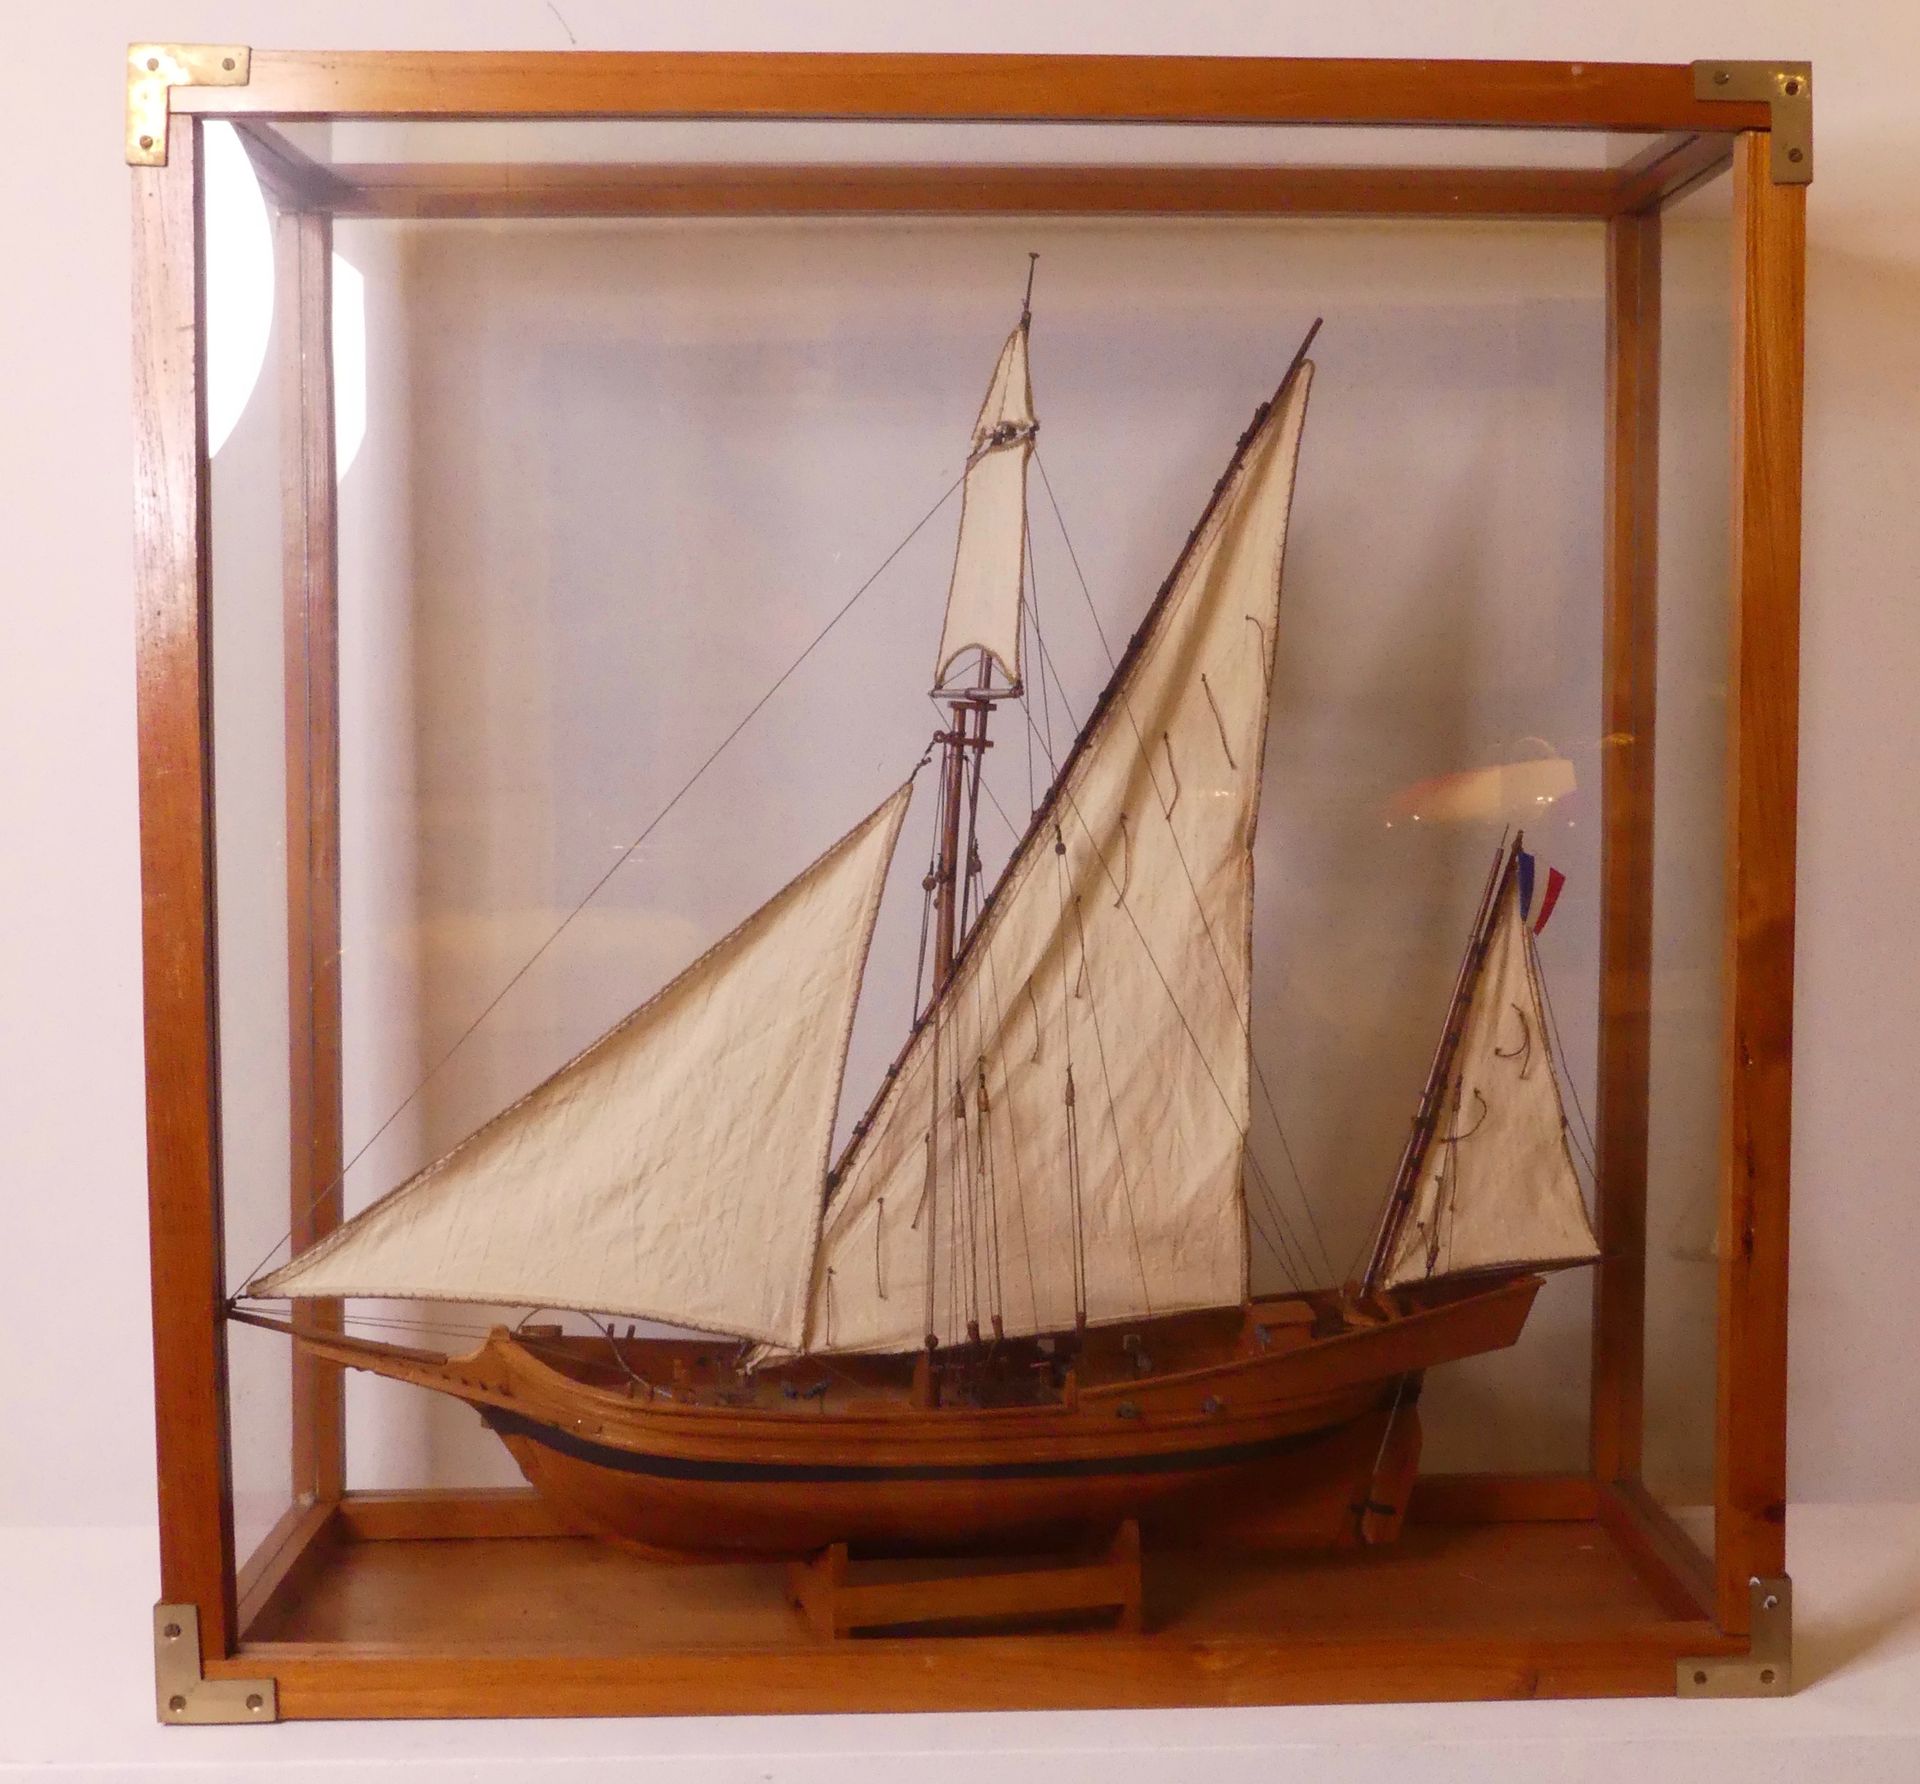 Null Model of a latin sail boat in wood, in a display case (72x72)